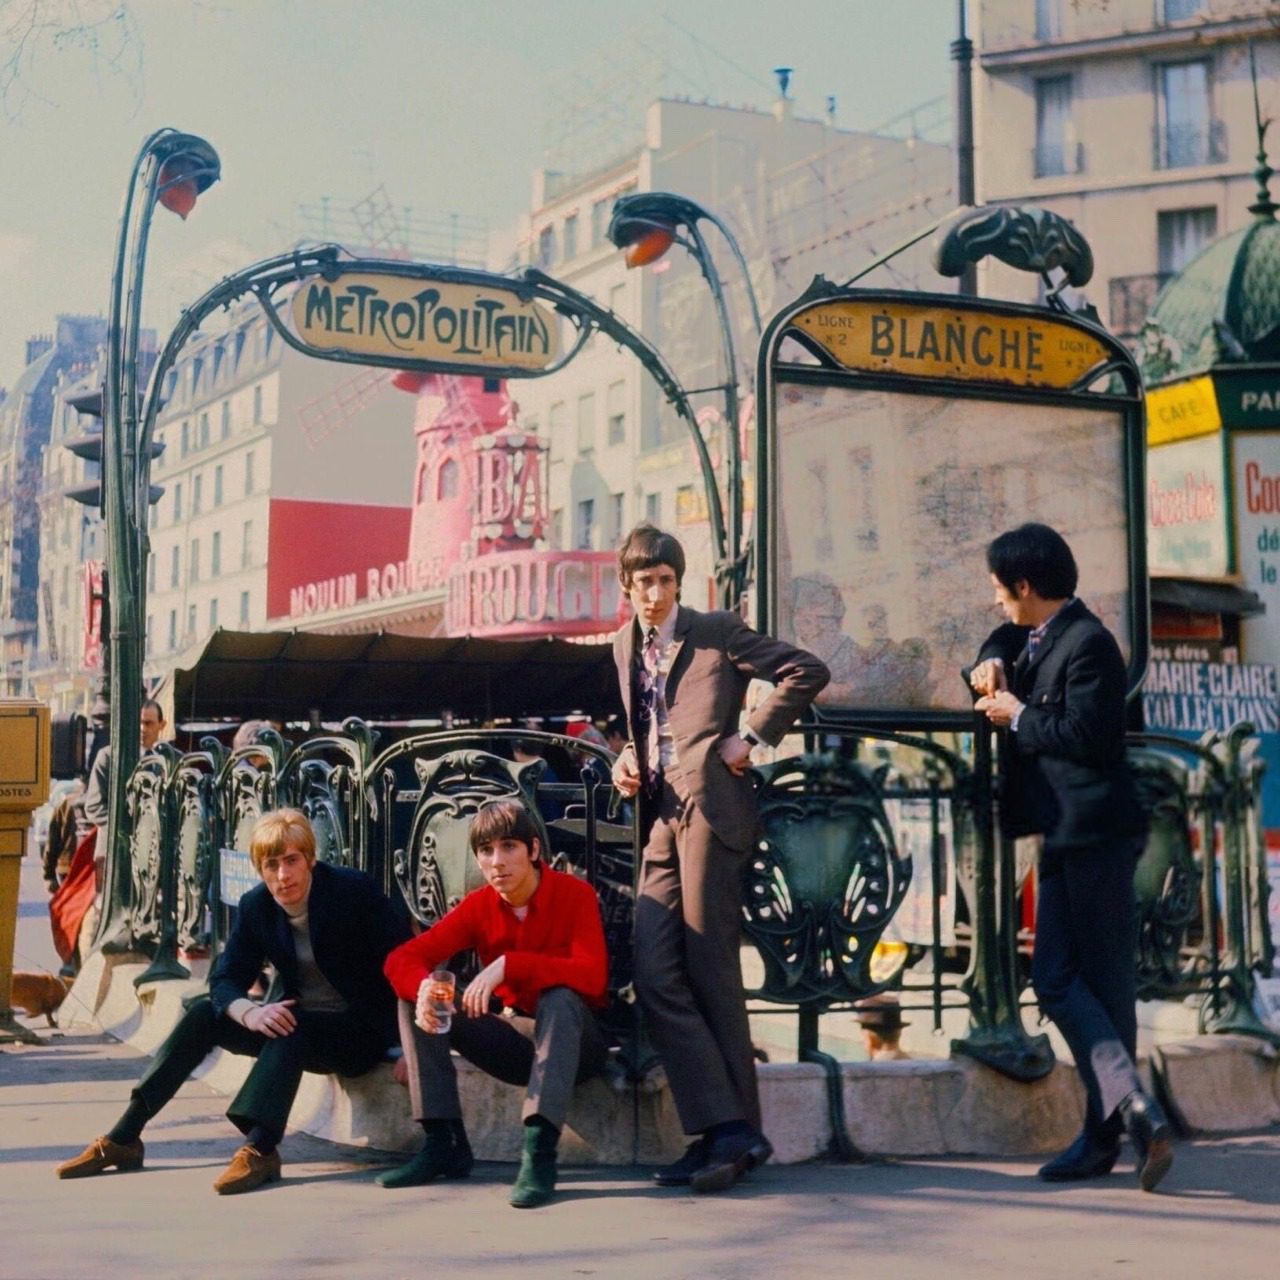 The Who, in front of Blanche Metro station in Paris, France, April 2, 1966